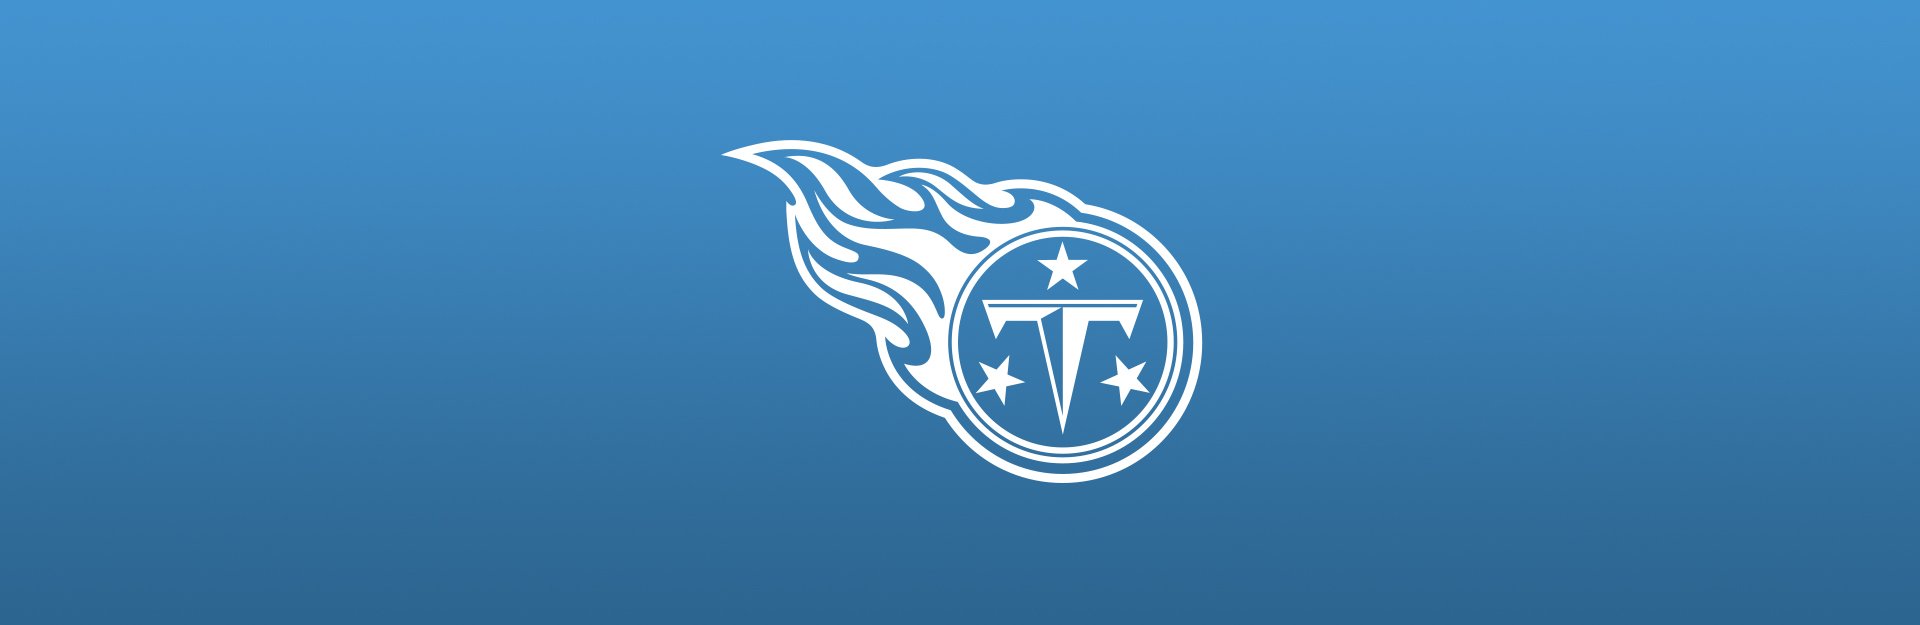 Tennessee Titans logo overlaid on blue background